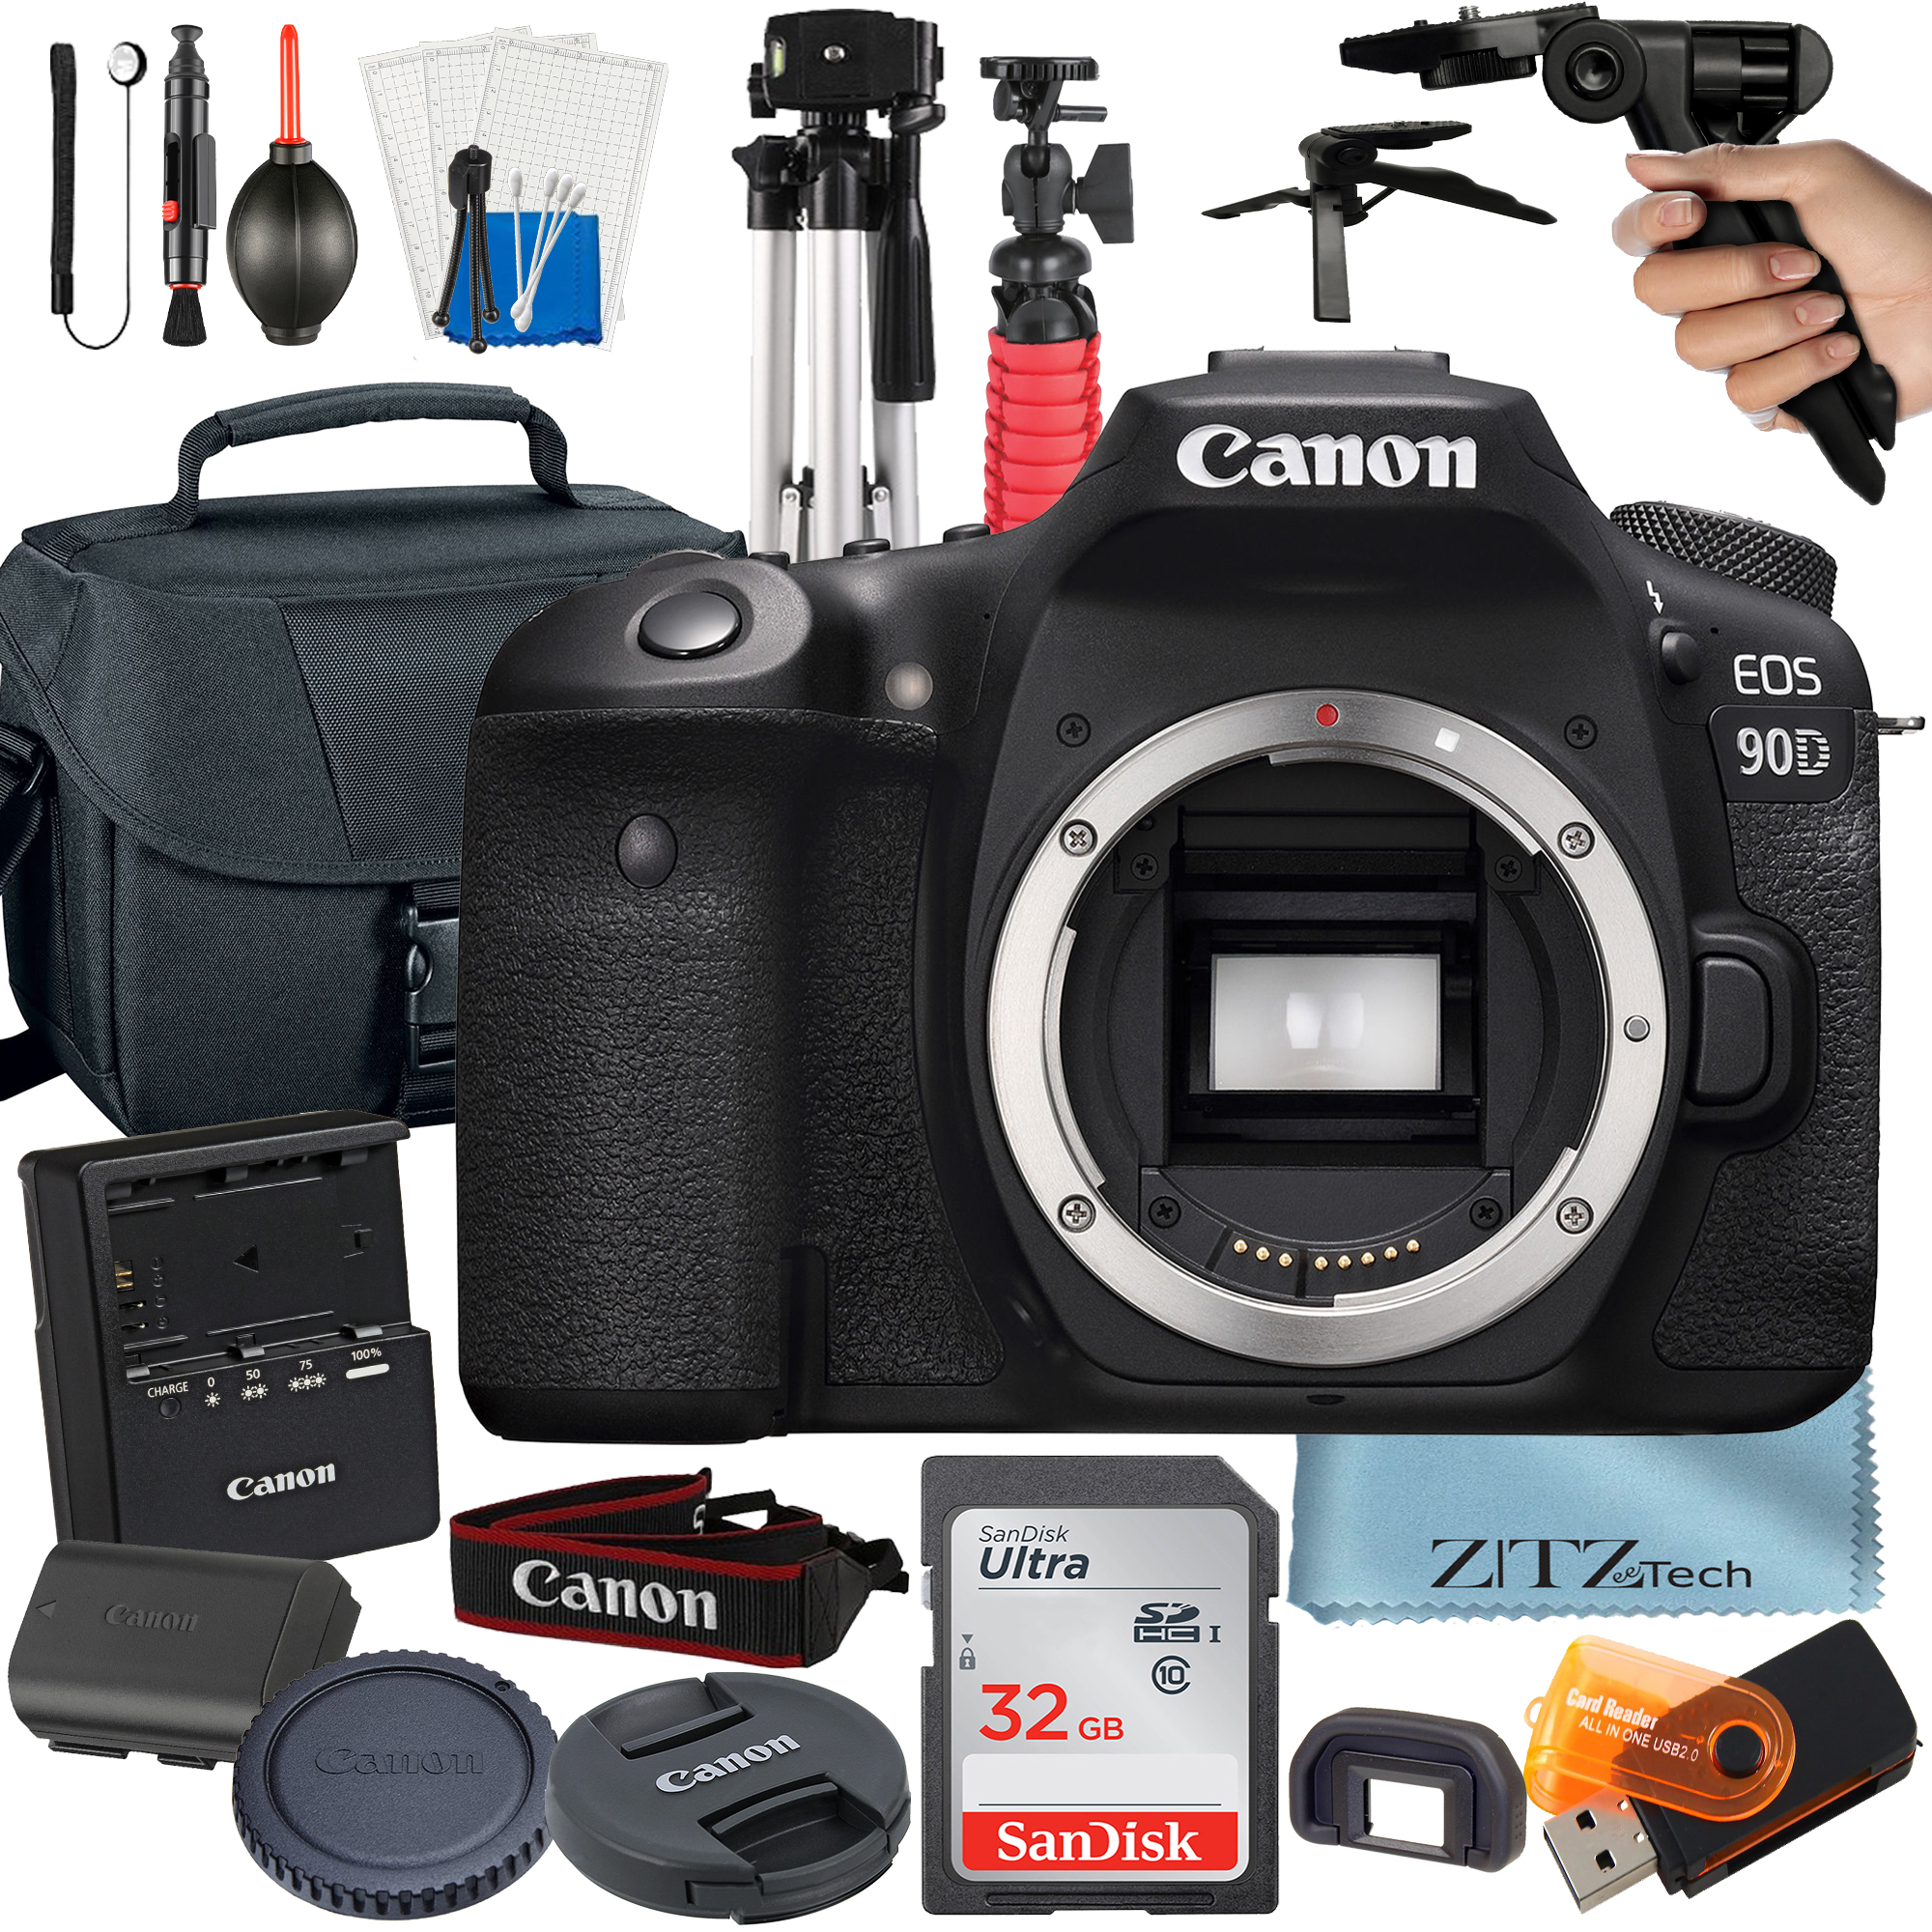 Canon EOS 90D DSLR Camera (Body Only) Bundle with 32GB SanDisk Card + Case + Tripod + ZeeTech Accessory